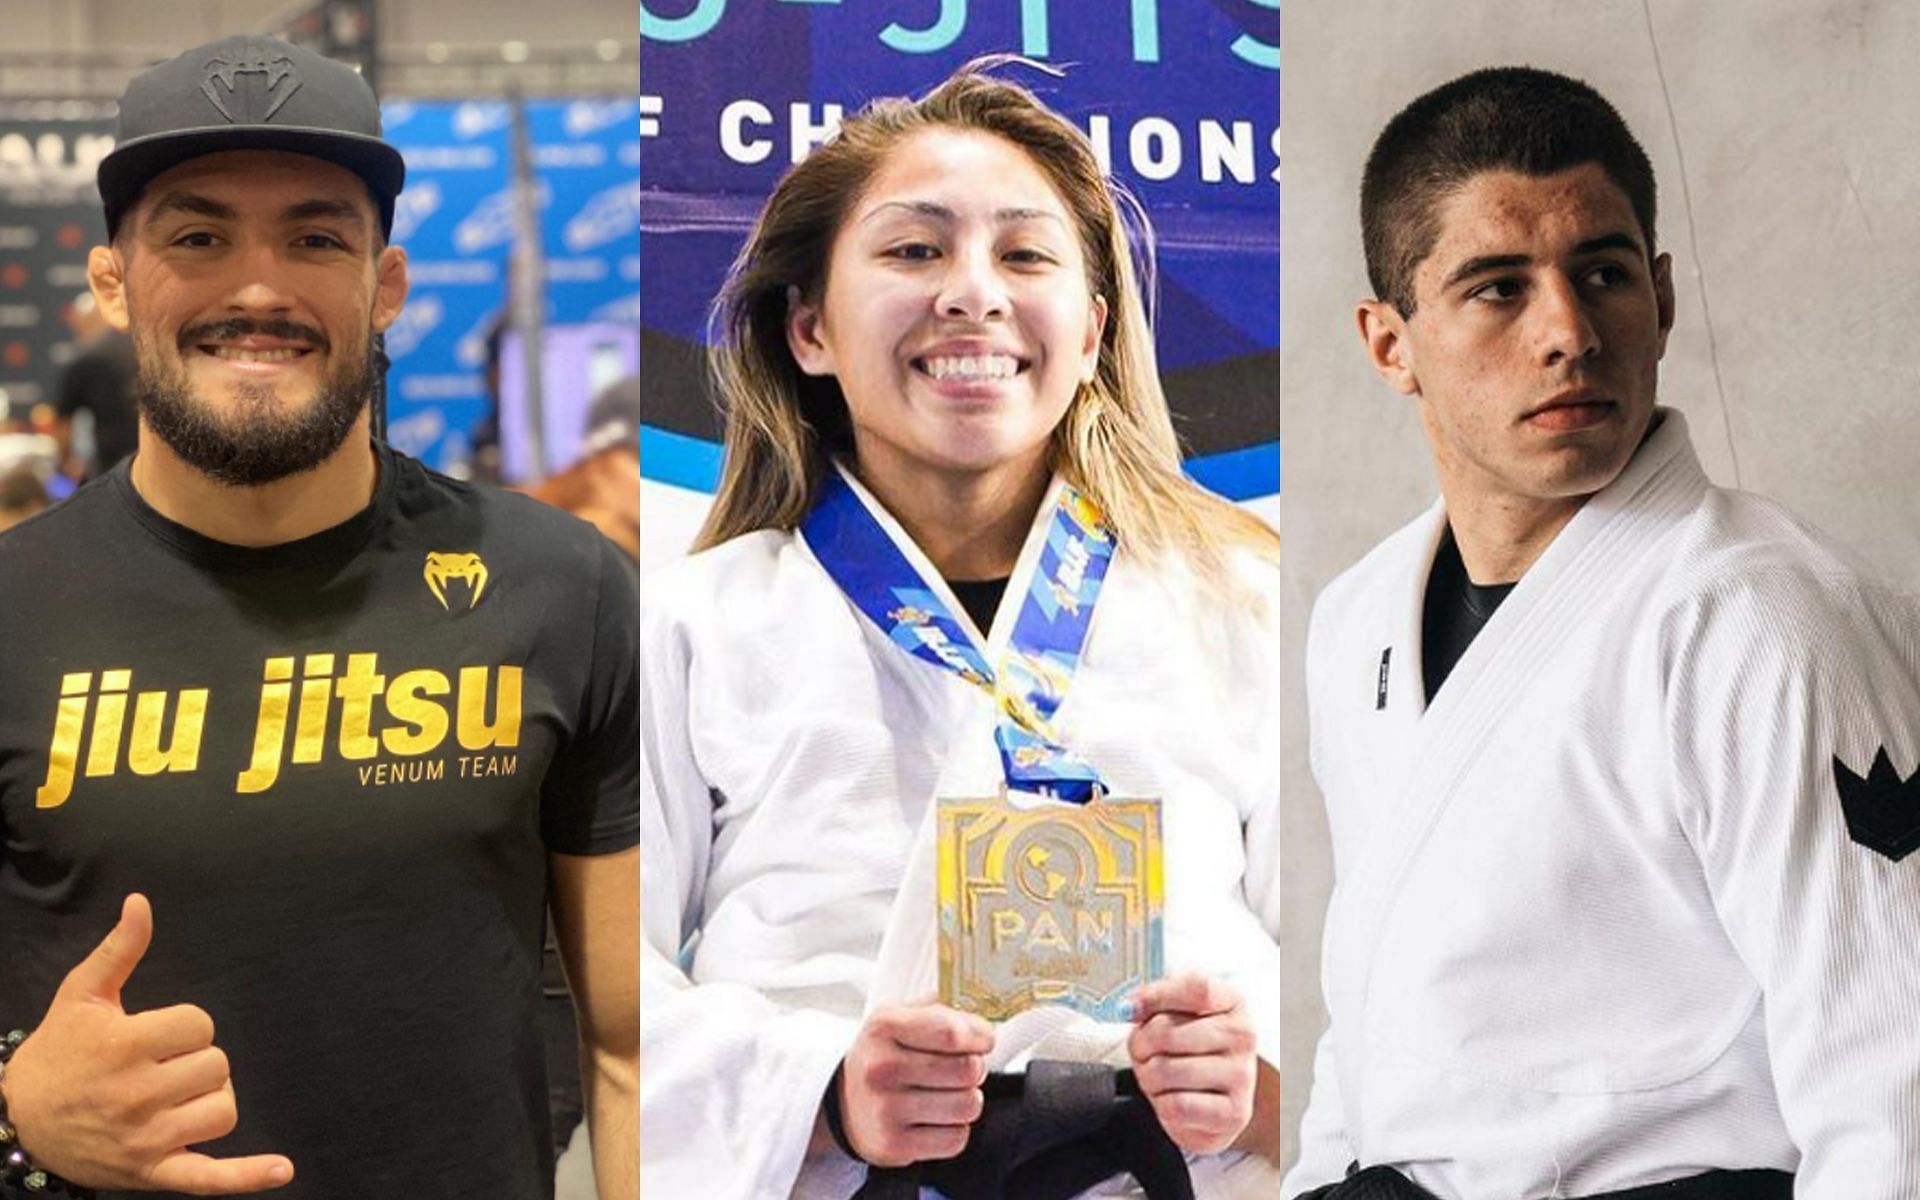 Renato Canuto(L), Jessa Khan(C), and Tainan Dalpra (R) are the latest signings of ONE Championship&#039;s submission grappling roster. | [Photos: @renatocanutobjj @jessakhan @tainandalpra on Instagram]